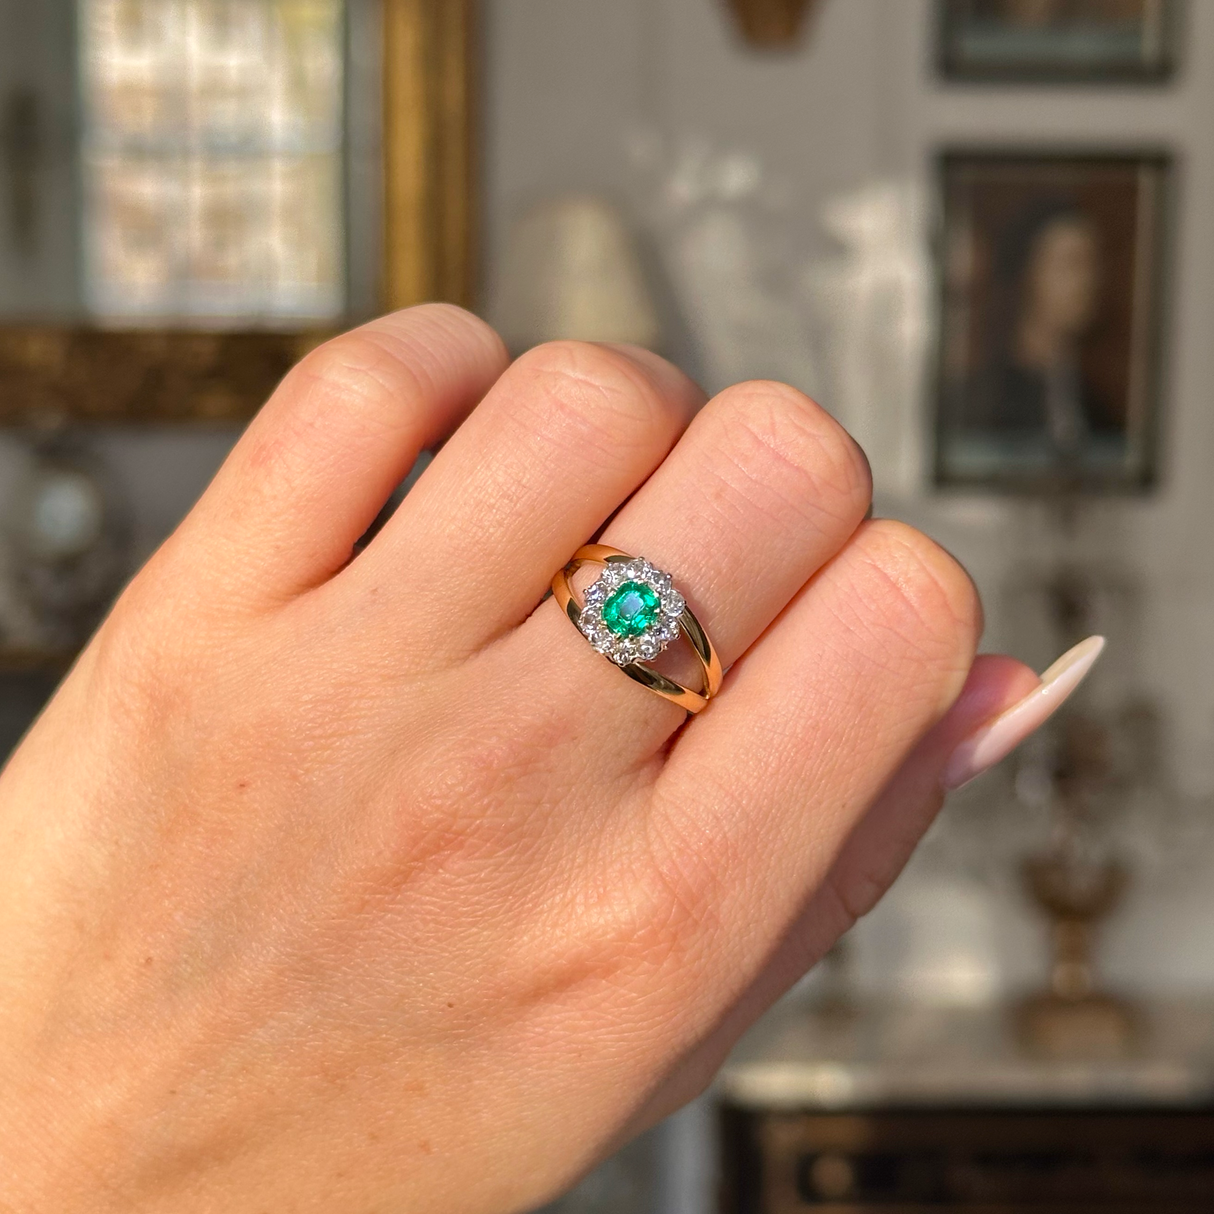 Vintage emerald and diamond cluster ring on closed hand. 